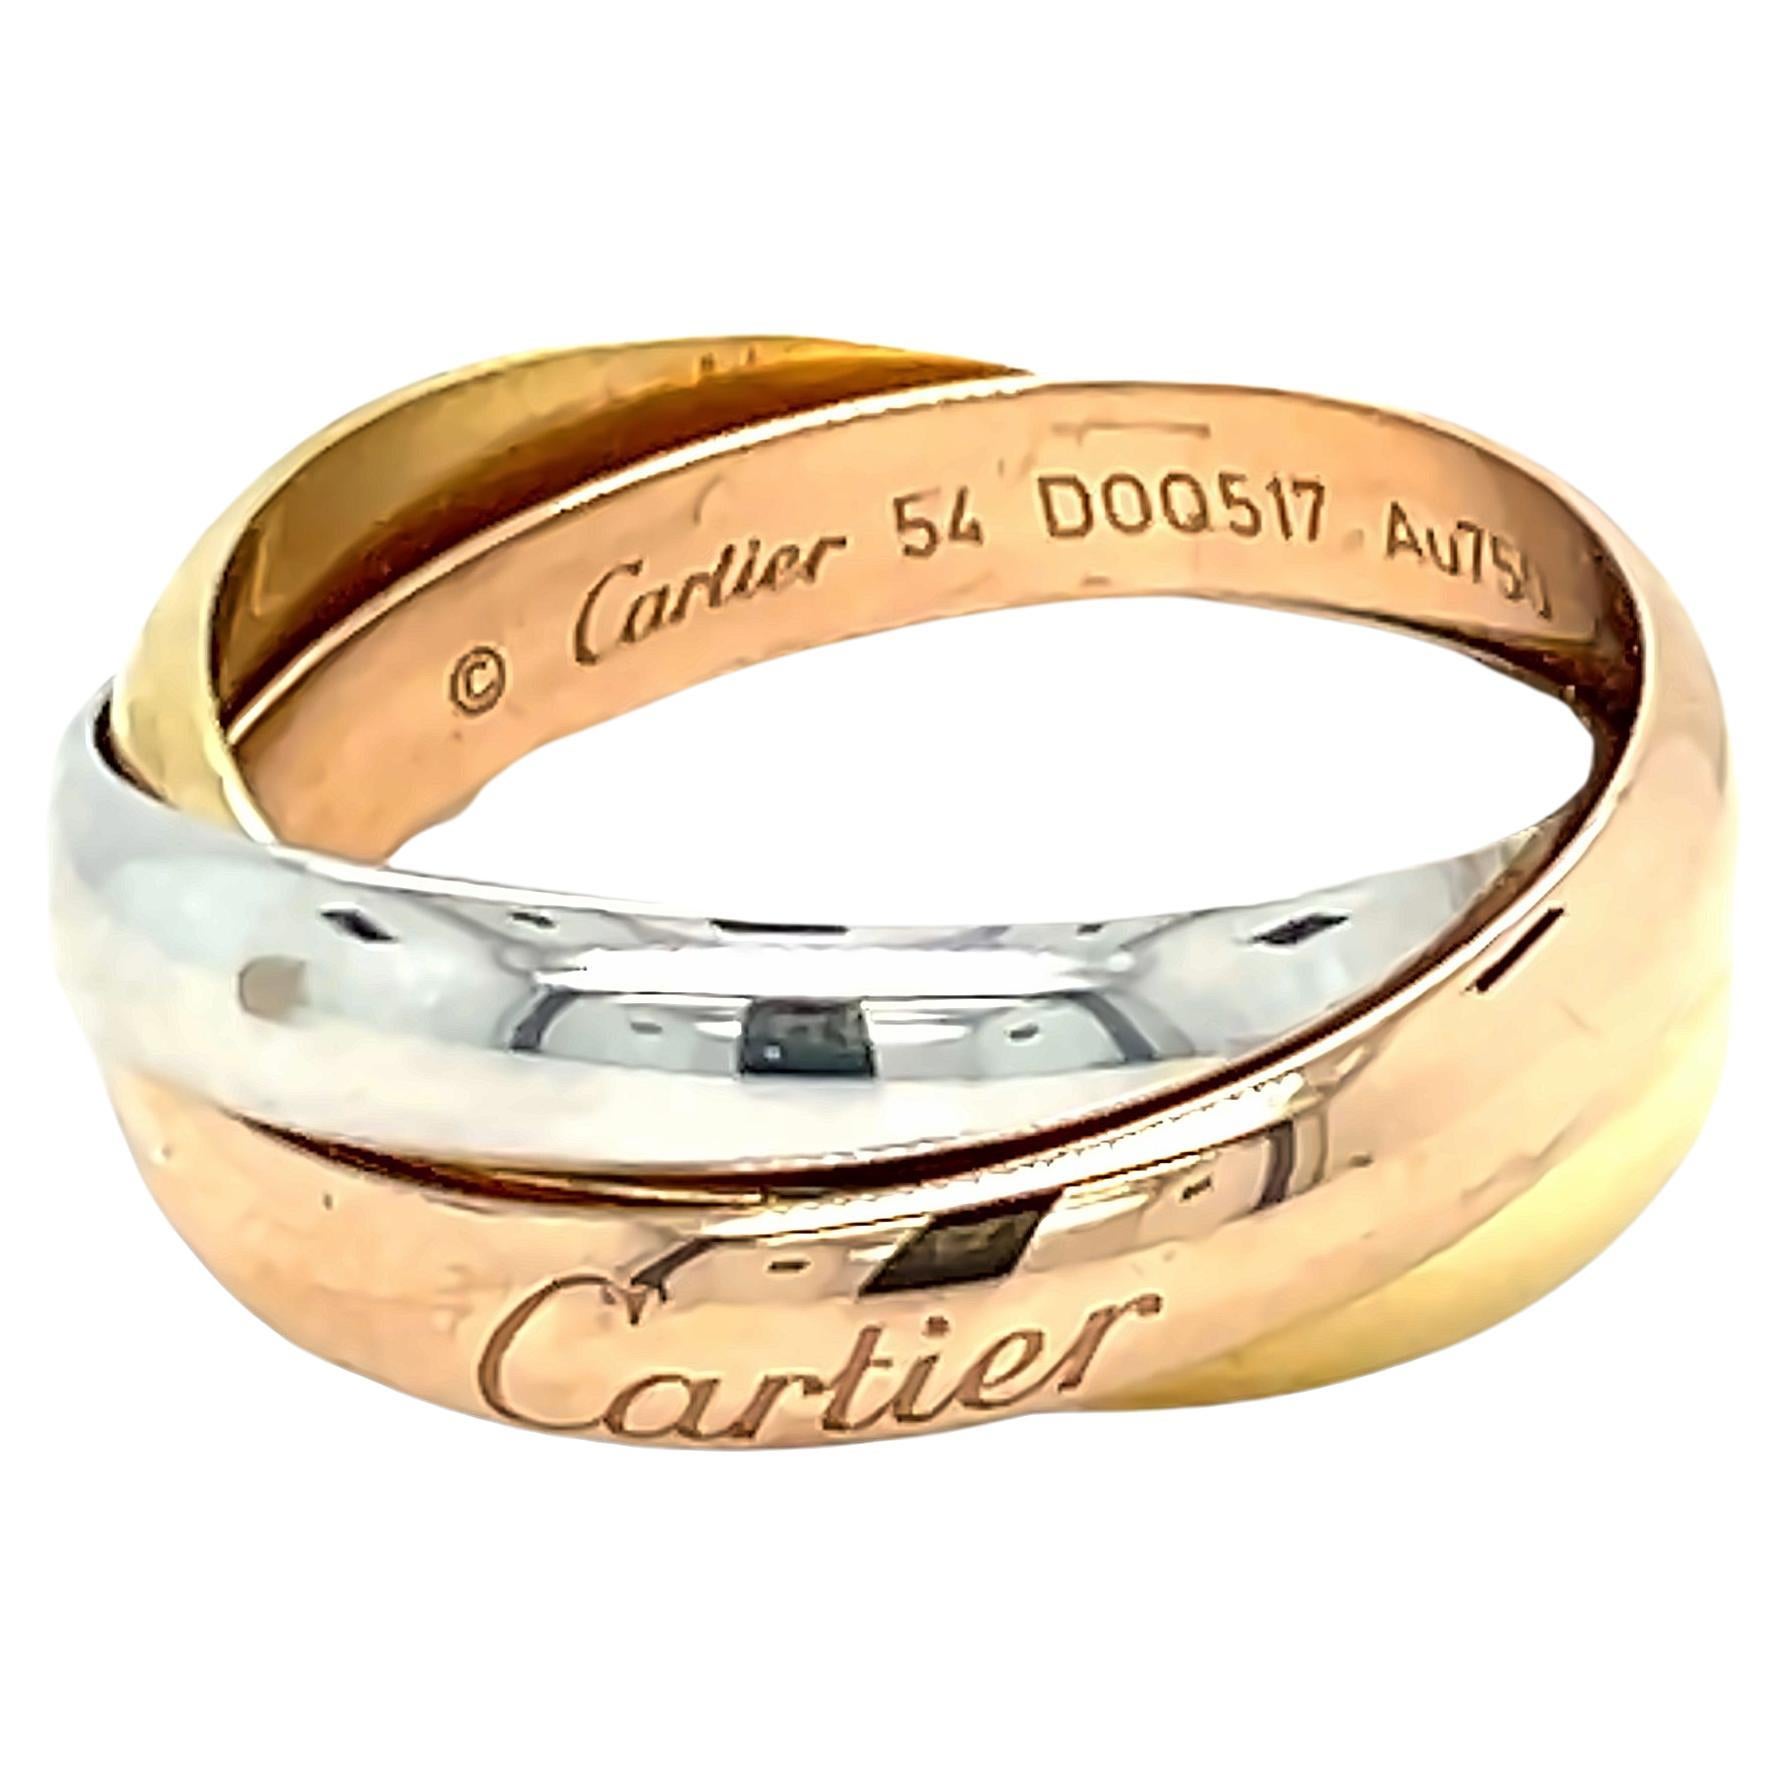 What is a trinity ring symbolize?